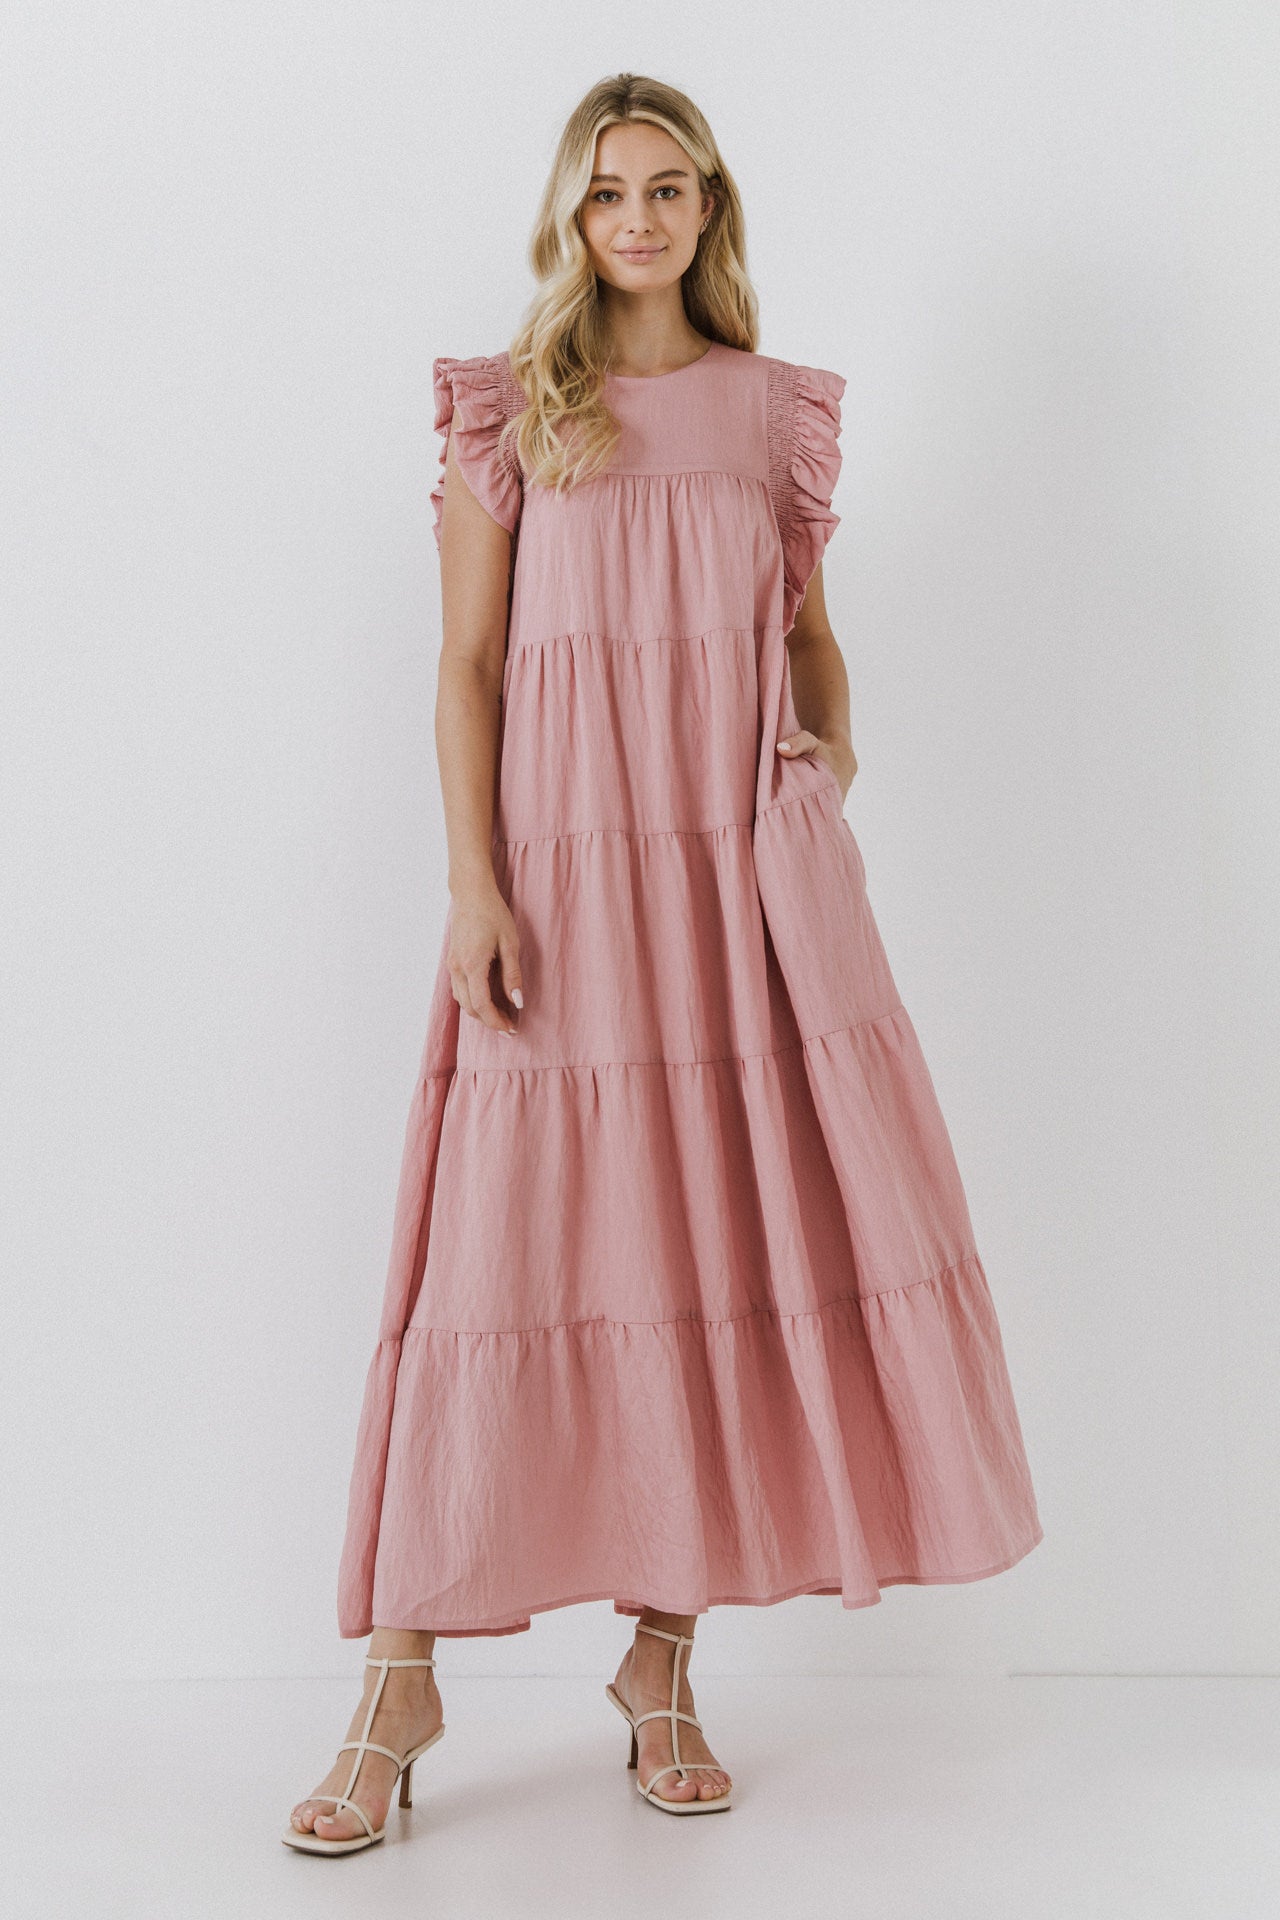 FREE THE ROSES - Ruffle Detail Maxi Dress - DRESSES available at Objectrare